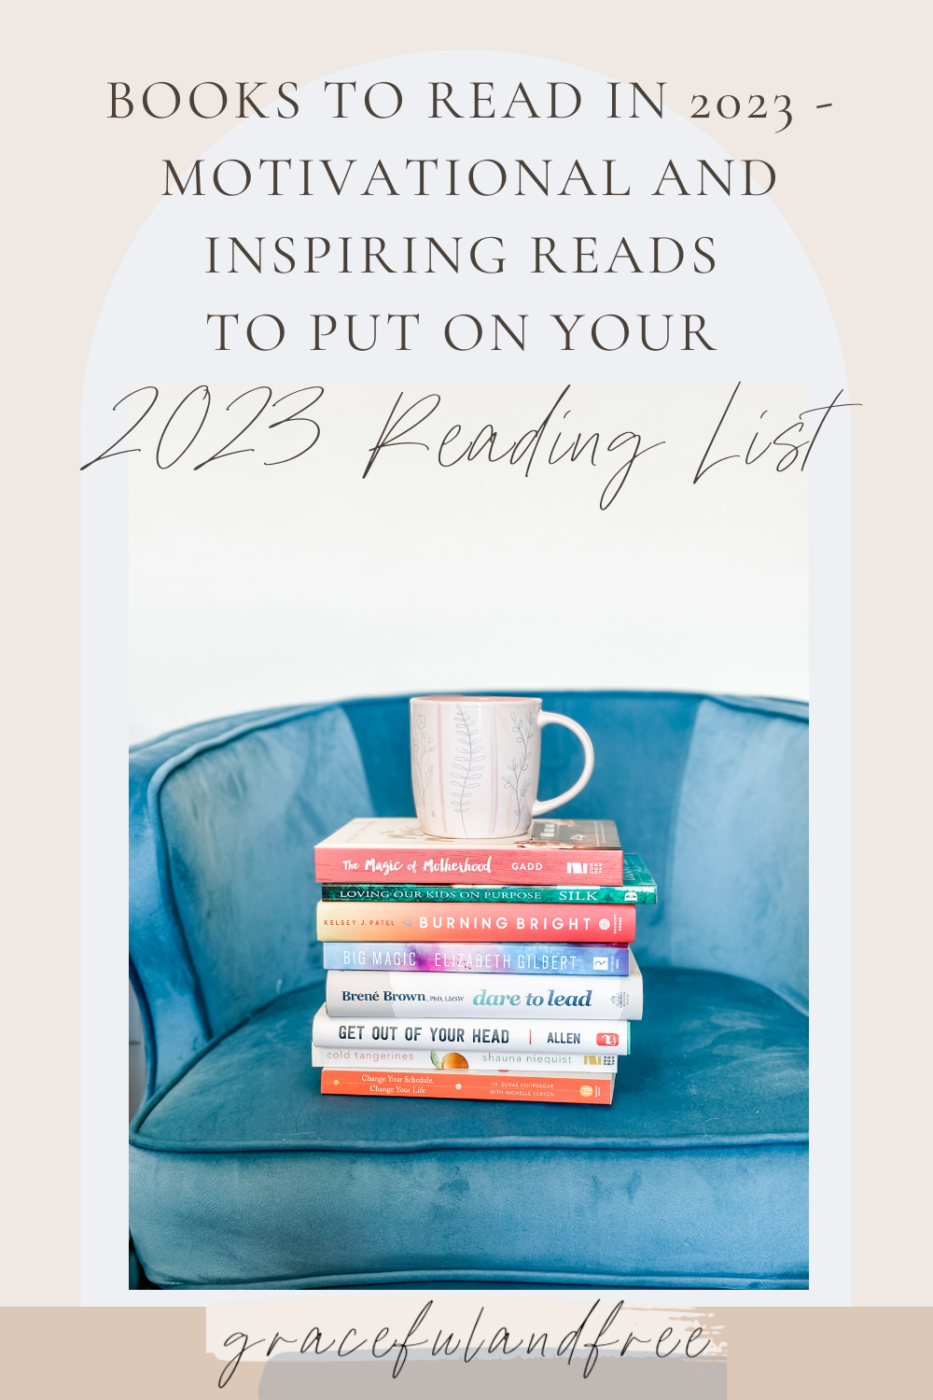 Books to read in 2023